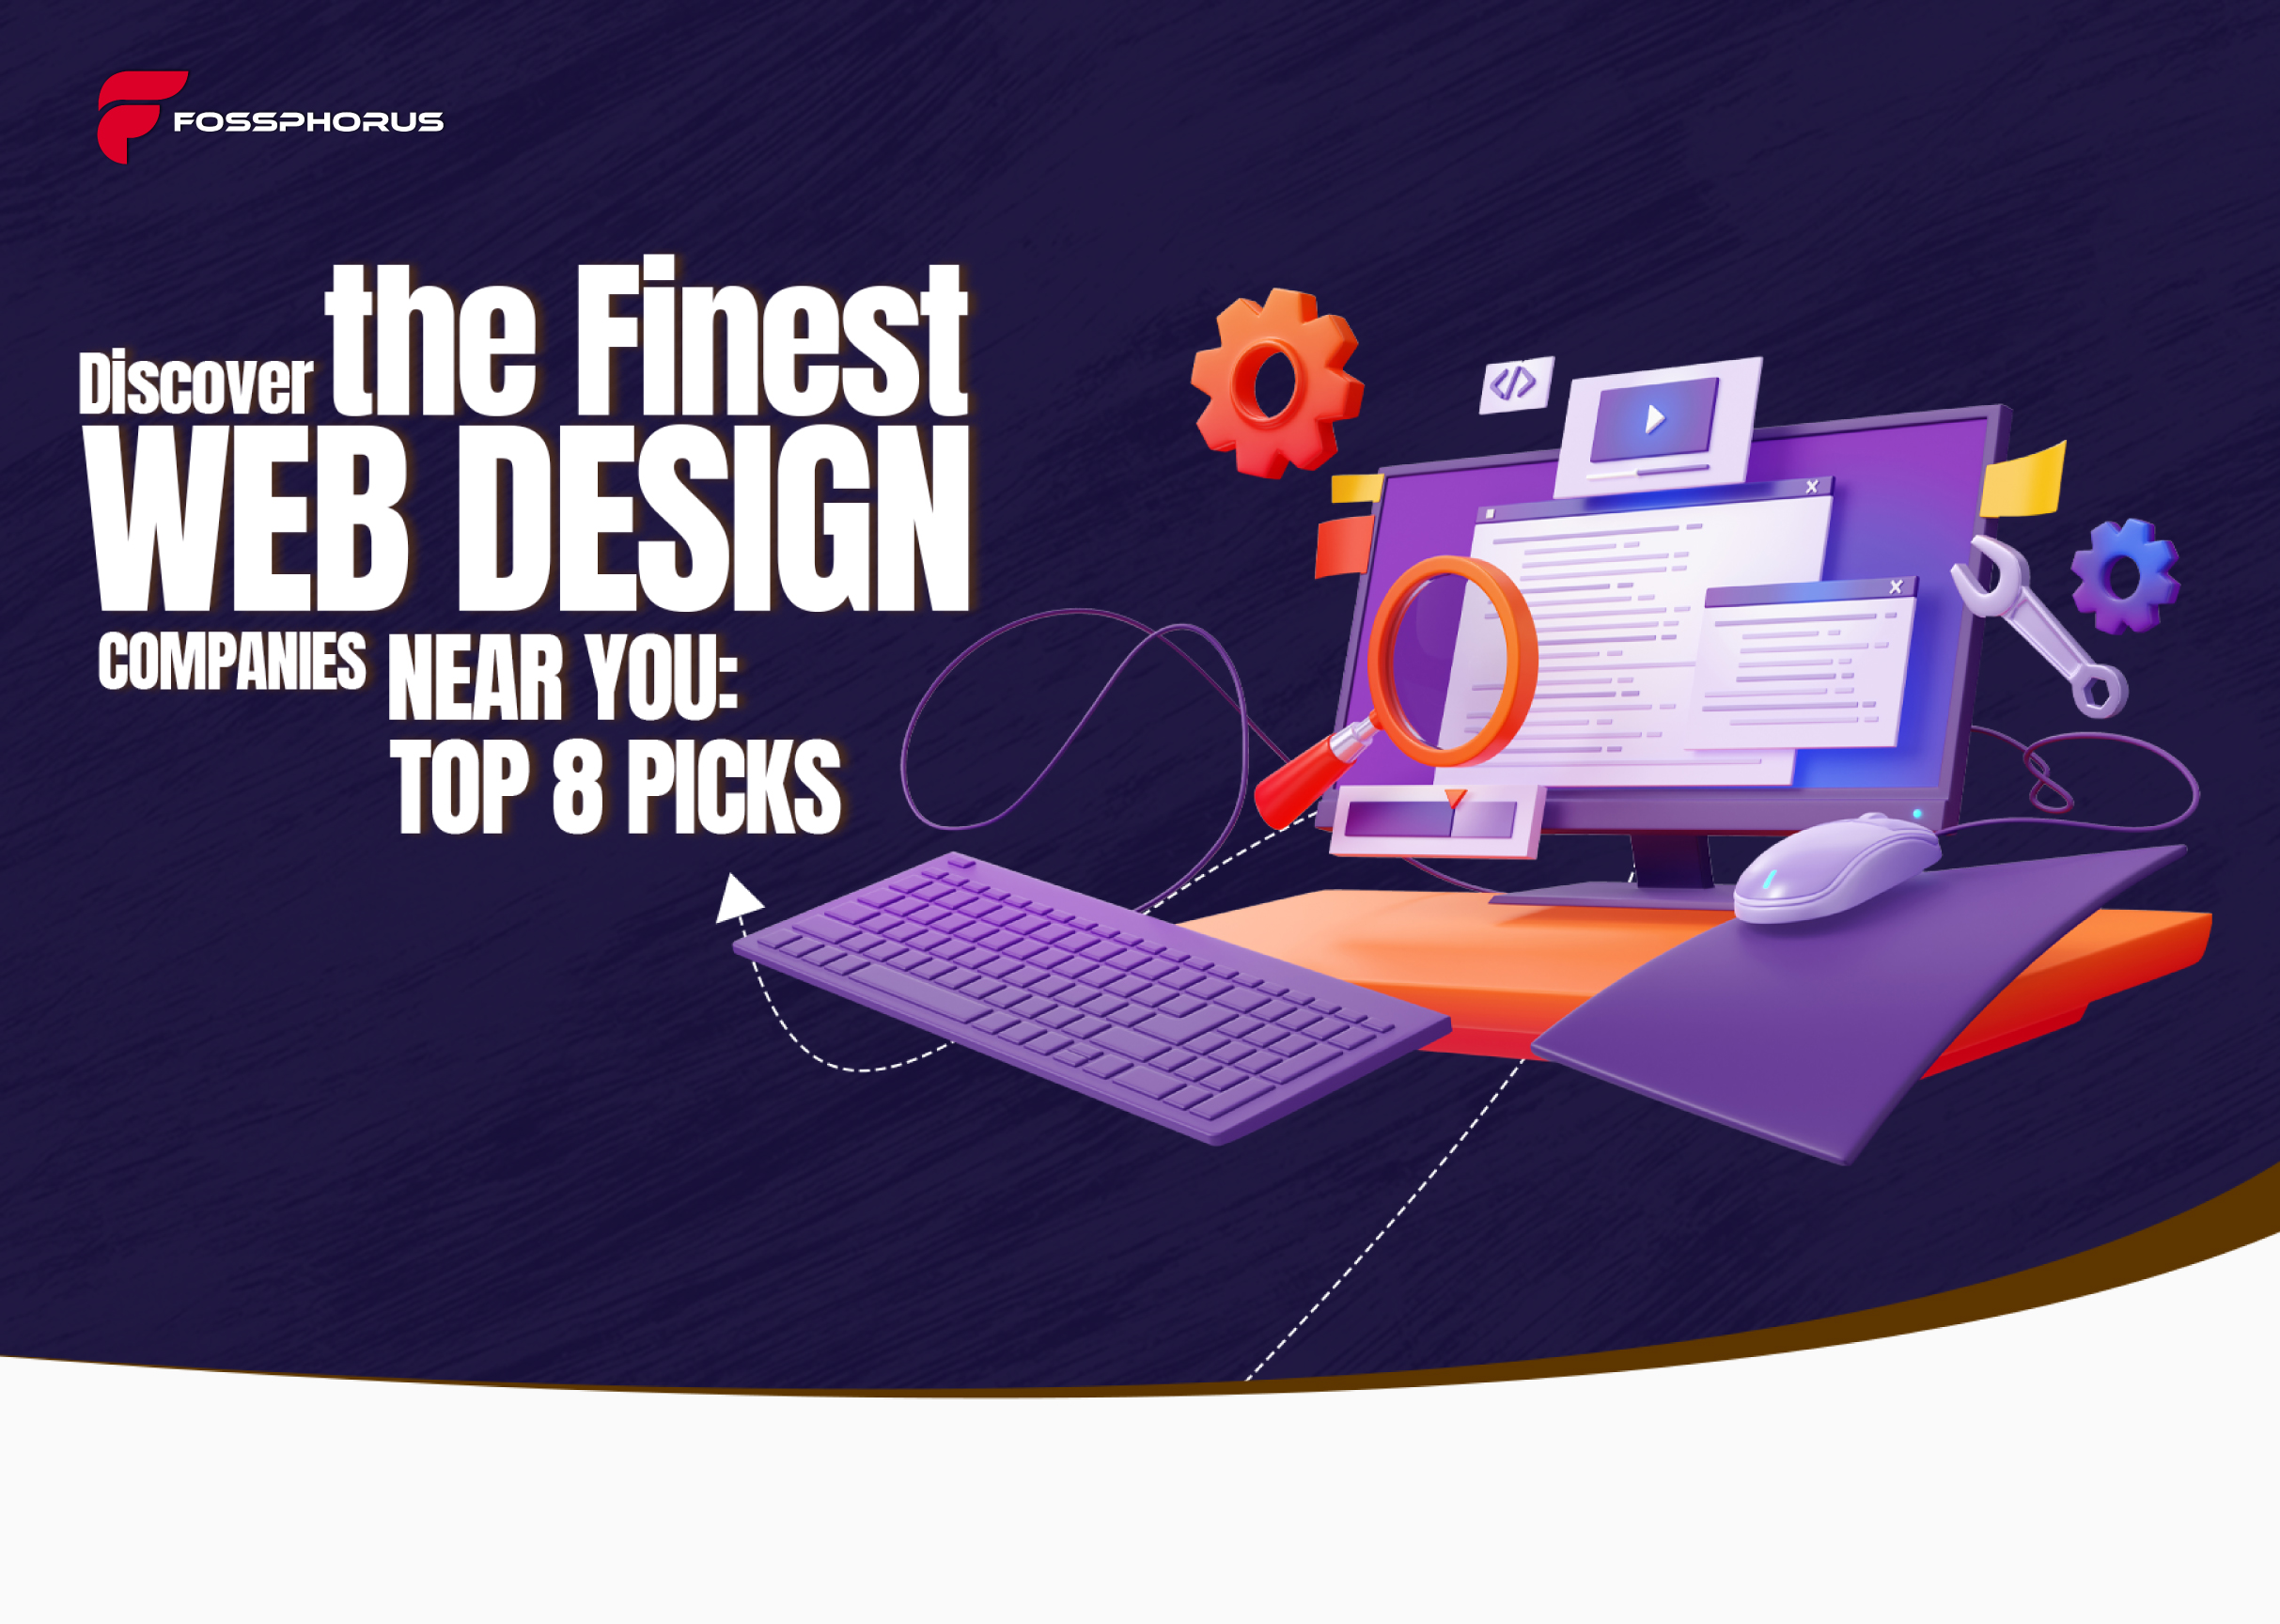 Discover-the-Finest-Web-Design-Companies-Near-You-Top-8-Picks